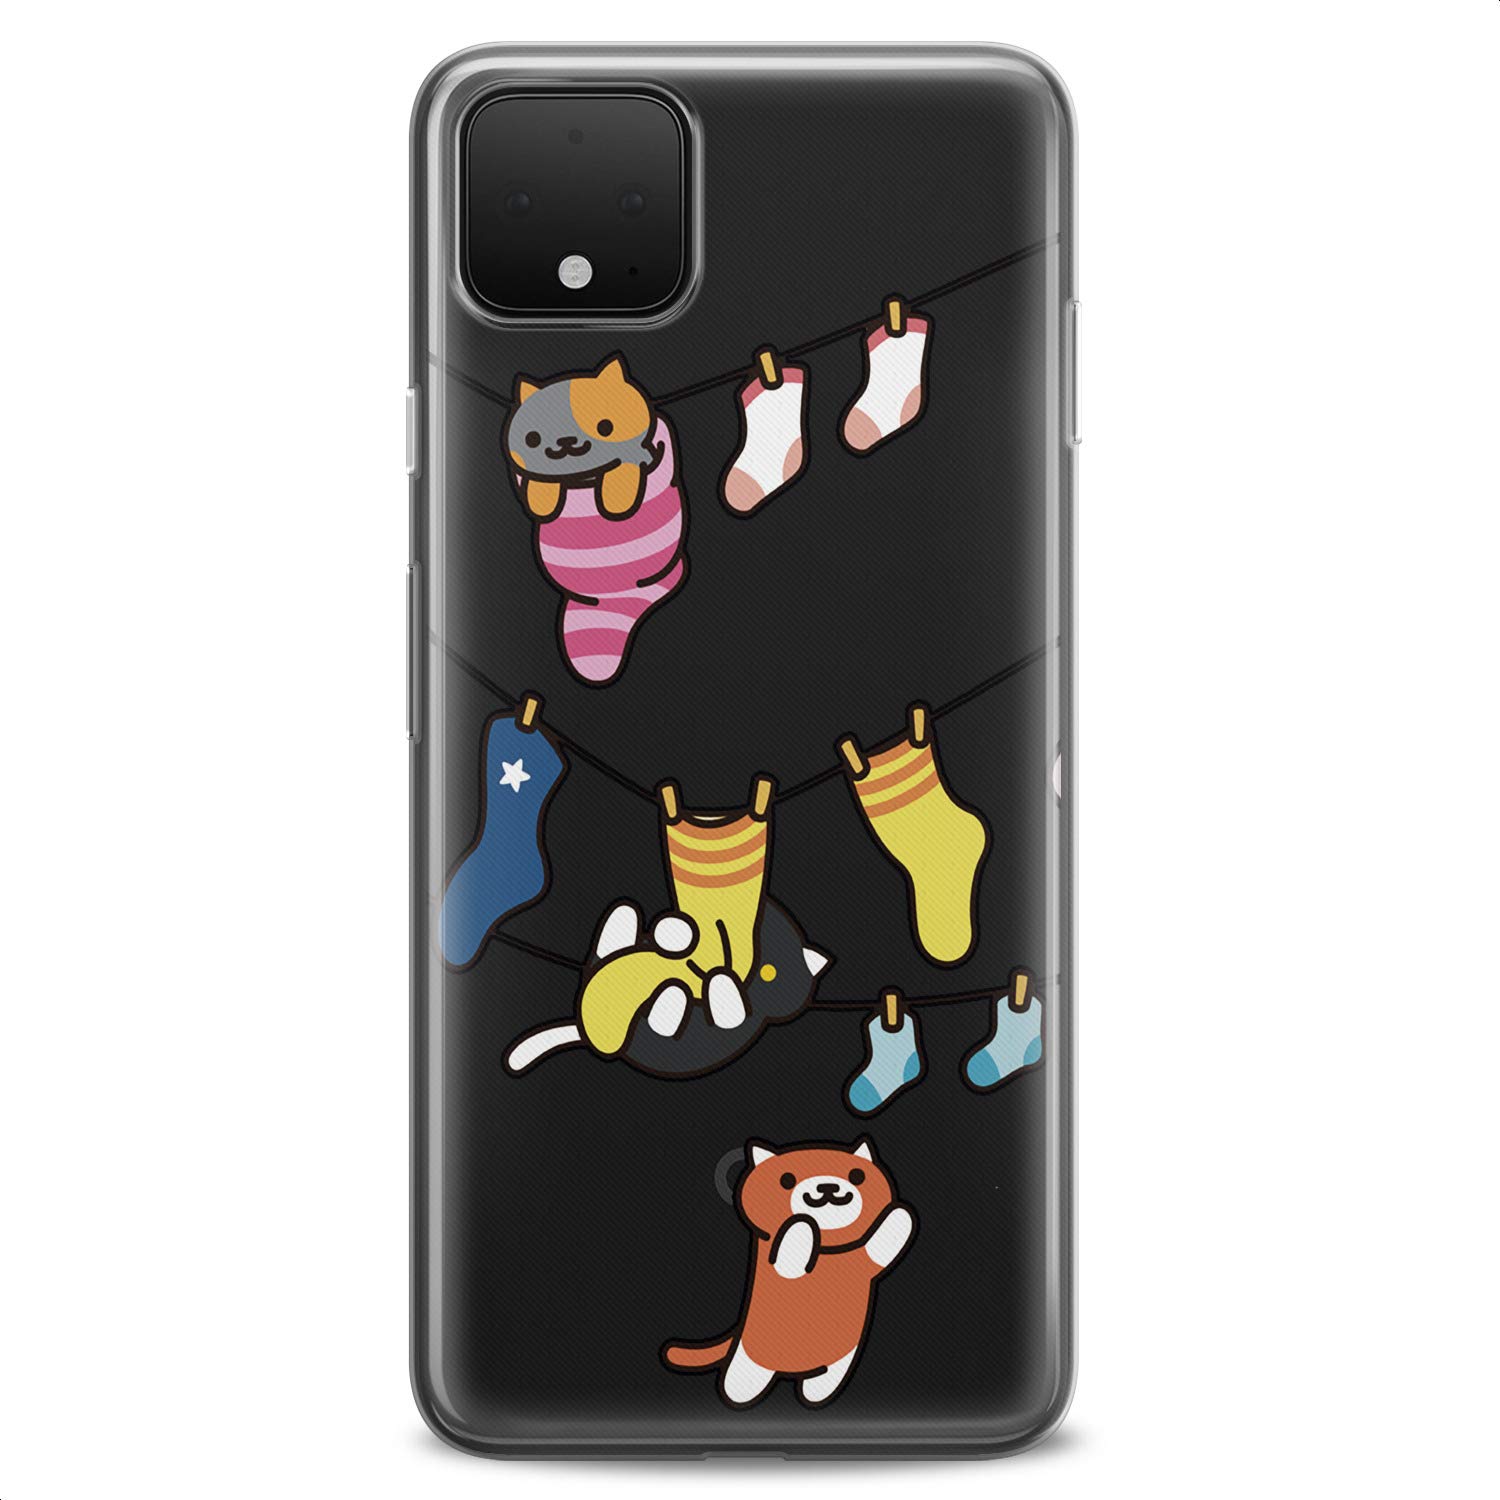 Cavka TPU Case Replacement for Google Pixel 7 6a Pro 5a XL 4a 5G 2 XL 3 XL 3a XL 4 Girls Clear Colored Kitties Design Print Teen Animal Theme Cute Yellow Cats Flexible Silicone Slim fit Soft Funny